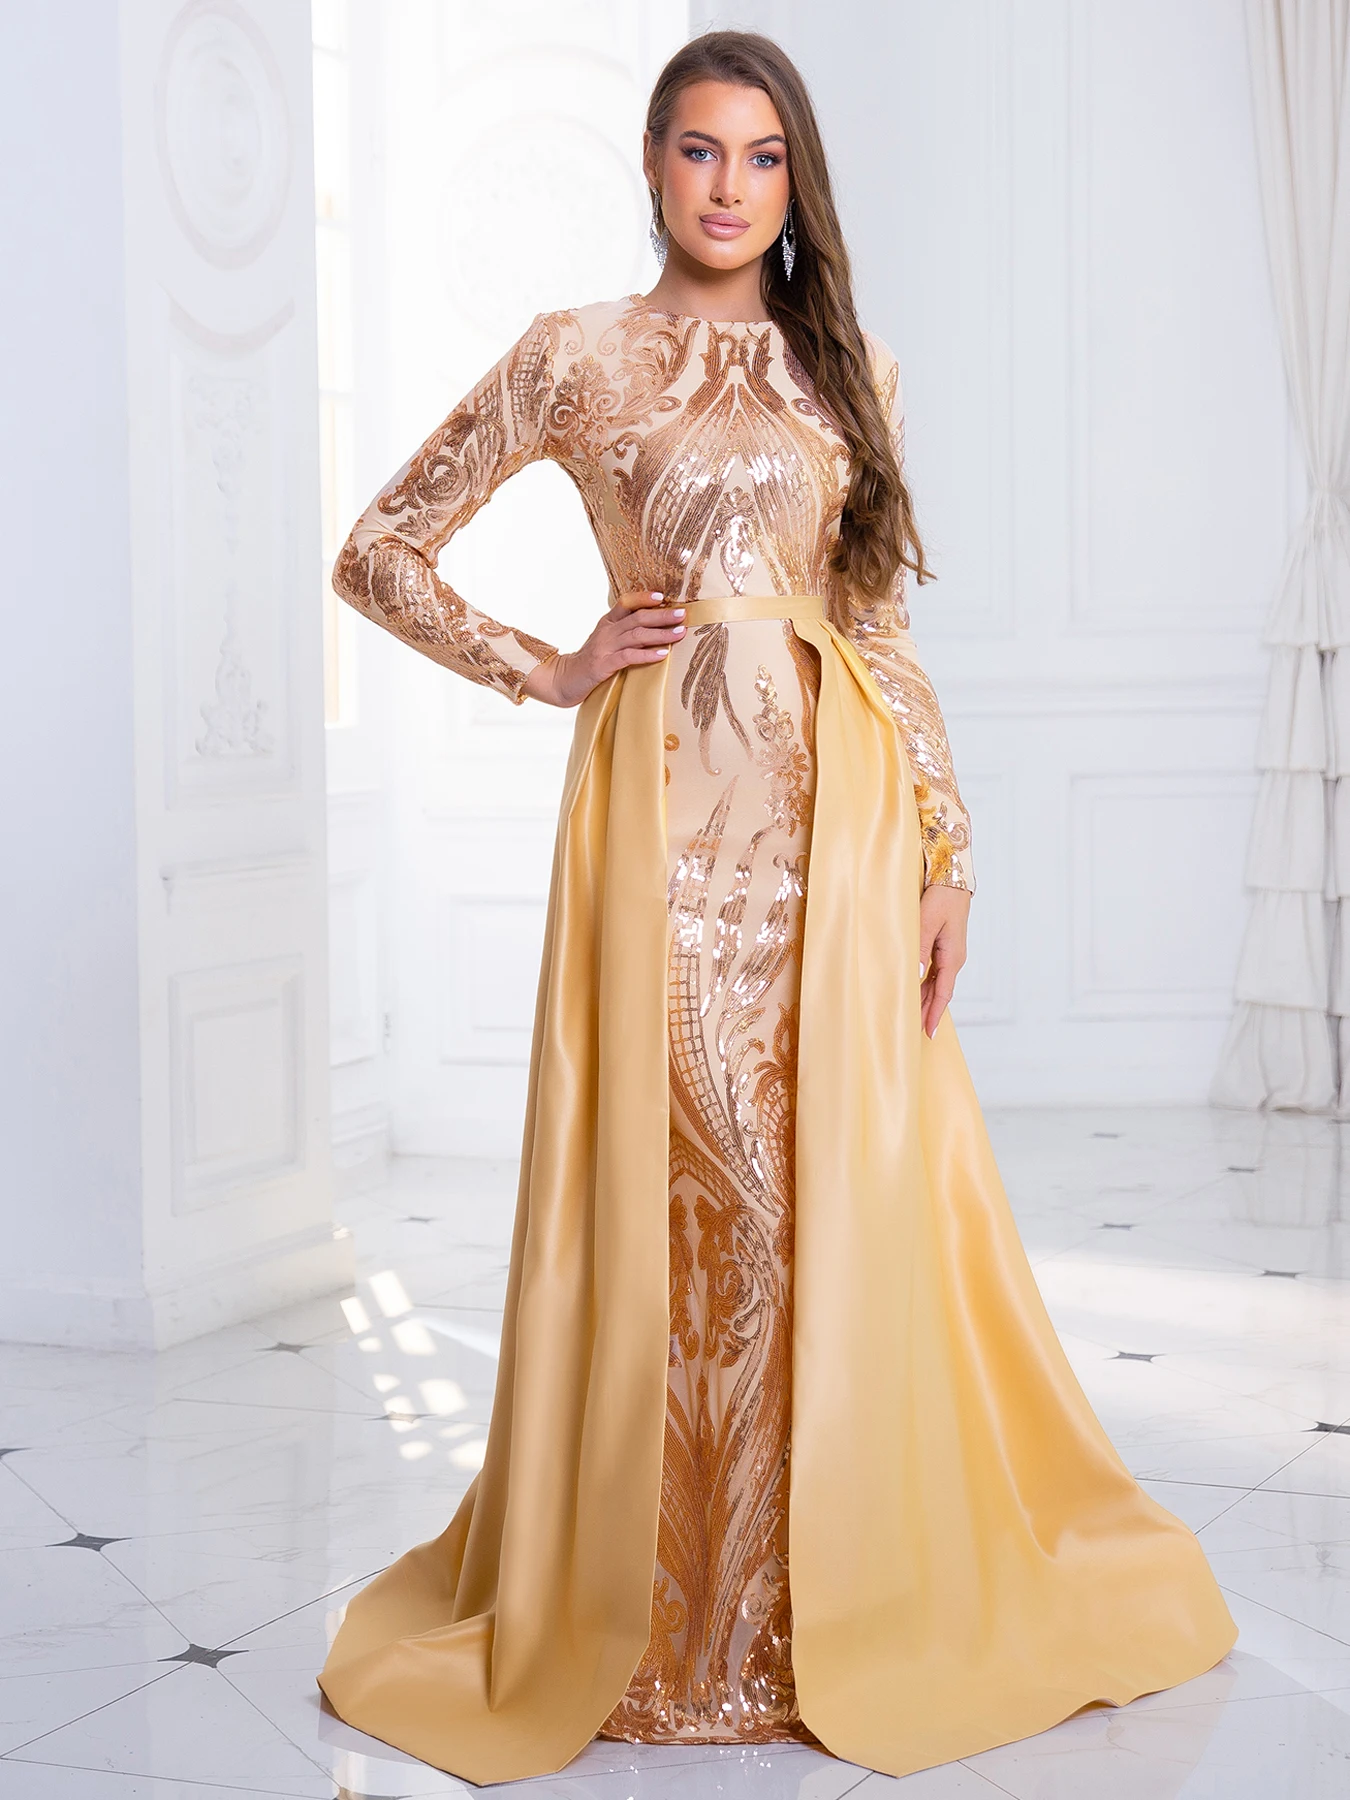 Ekta Flared/A-line Gown Price in India - Buy Ekta Flared/A-line Gown online  at Flipkart.com